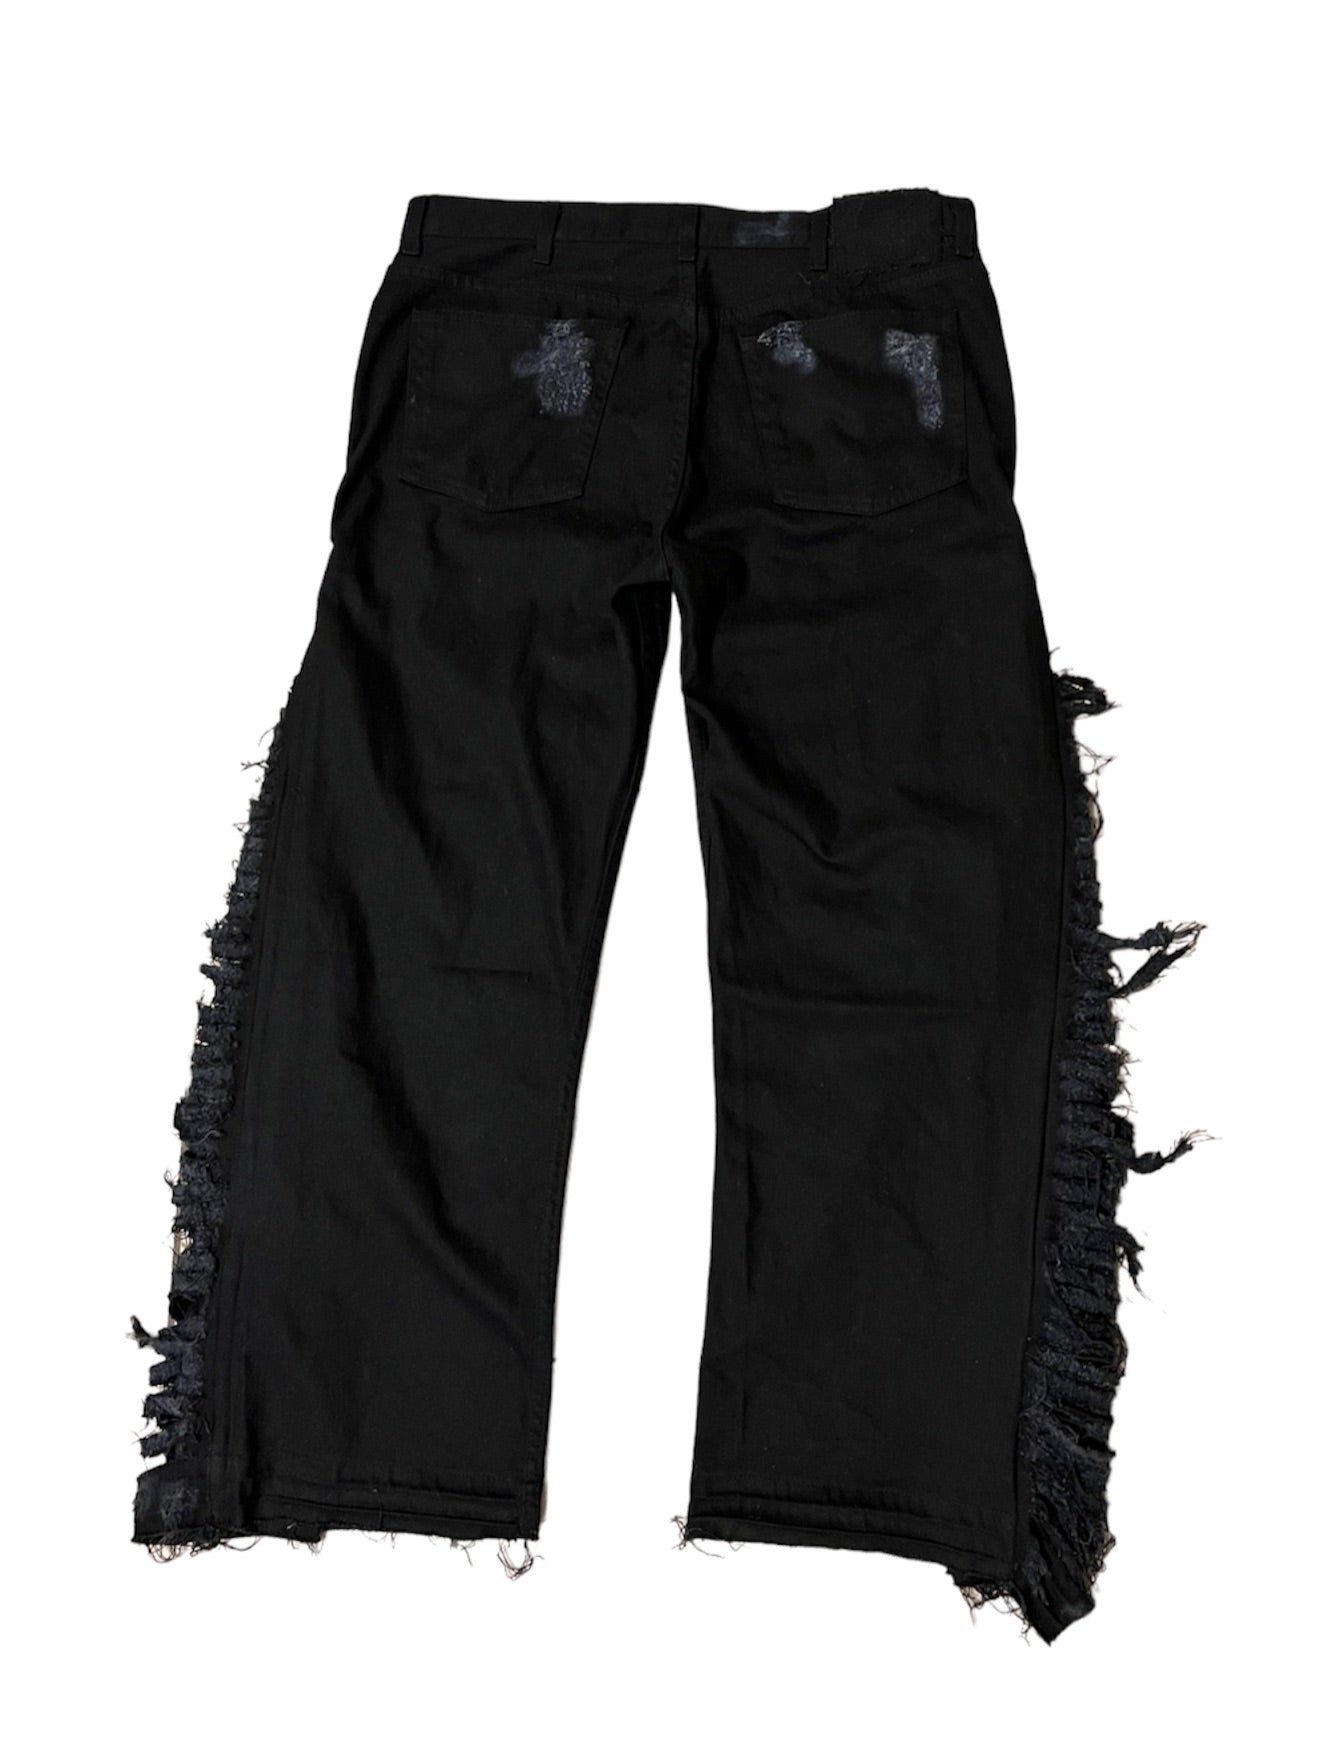 Black and Friday Deals Men'S Pants Men'S Autumn Denim Cotton Straight  Ripped Hole Trousers Distressed Jeans Pants Blue 32 YRY - Walmart.com